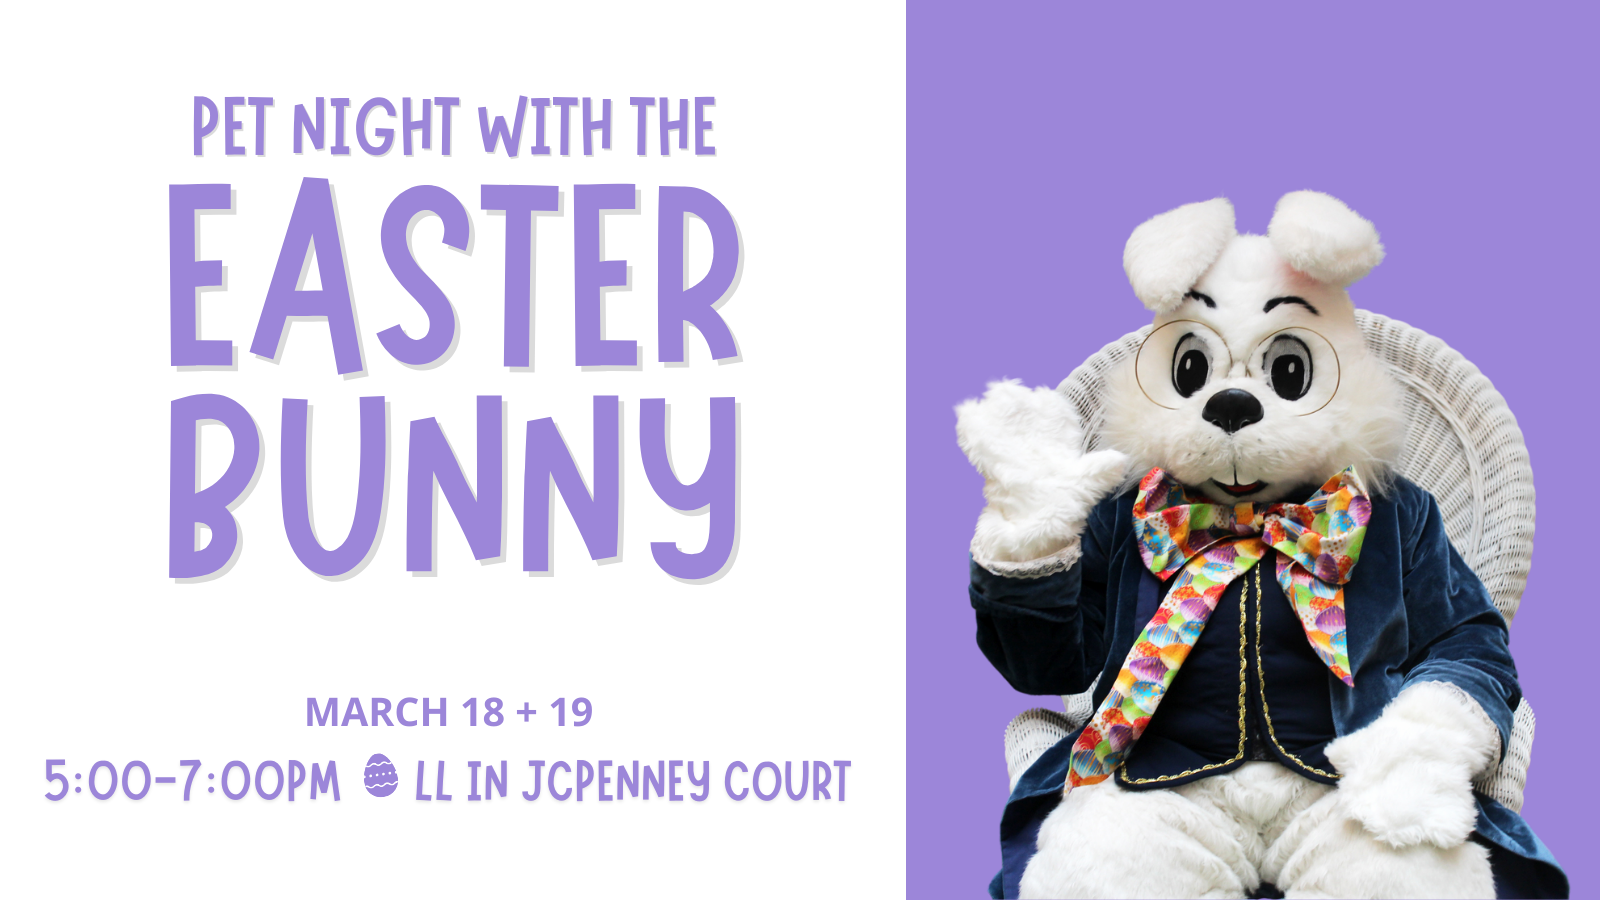 Pet Night with the Easter Bunny on March 18 and 19 from 5-7PM